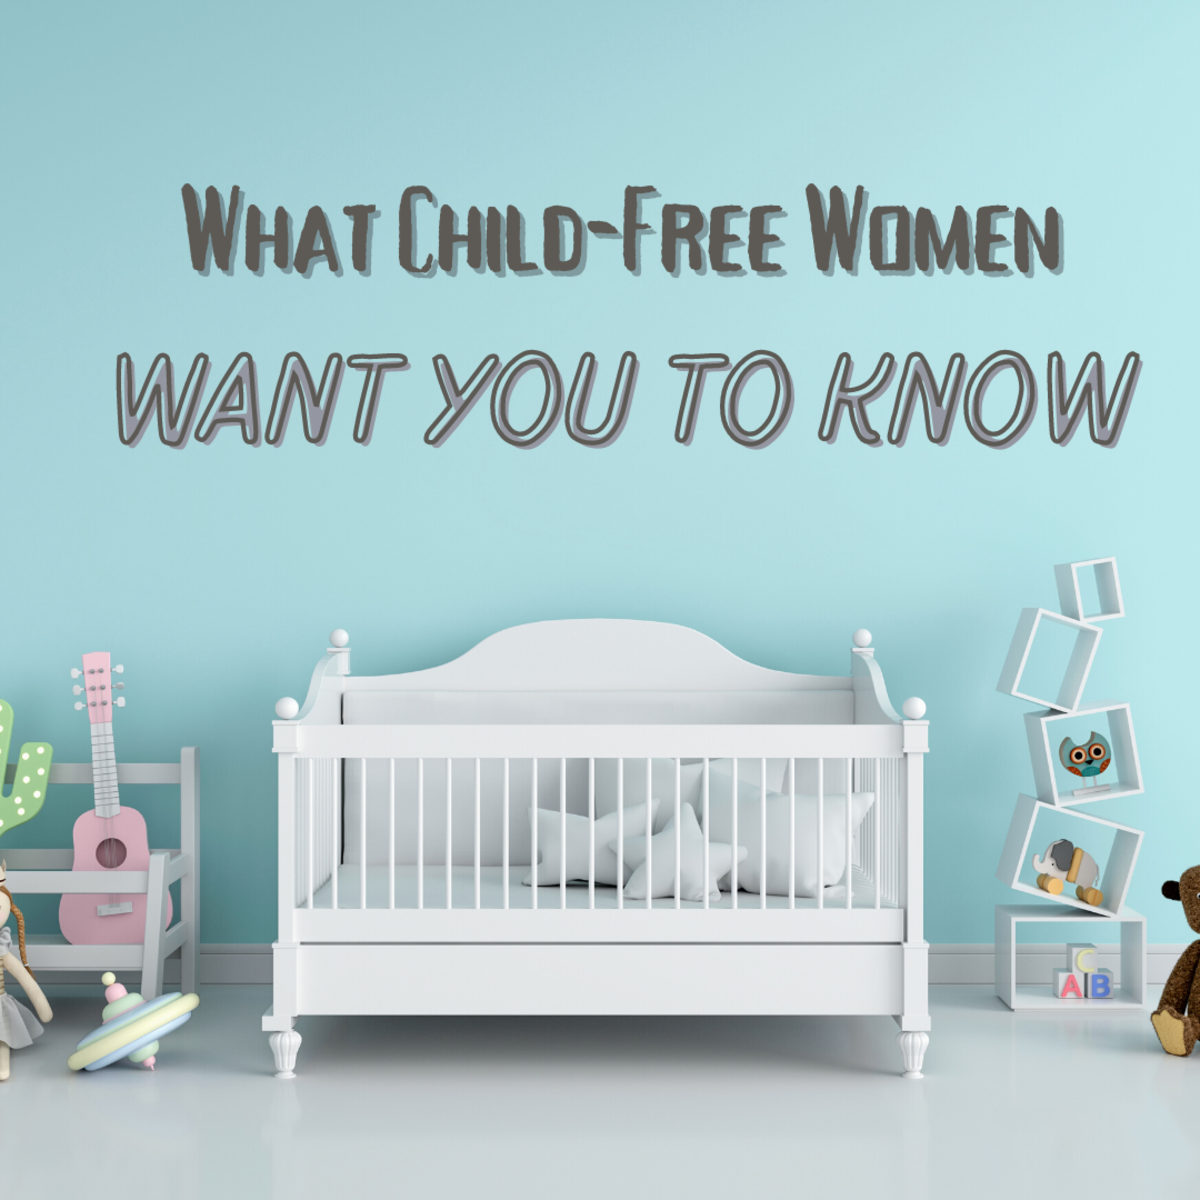 5 things that women who don't want children want you to know